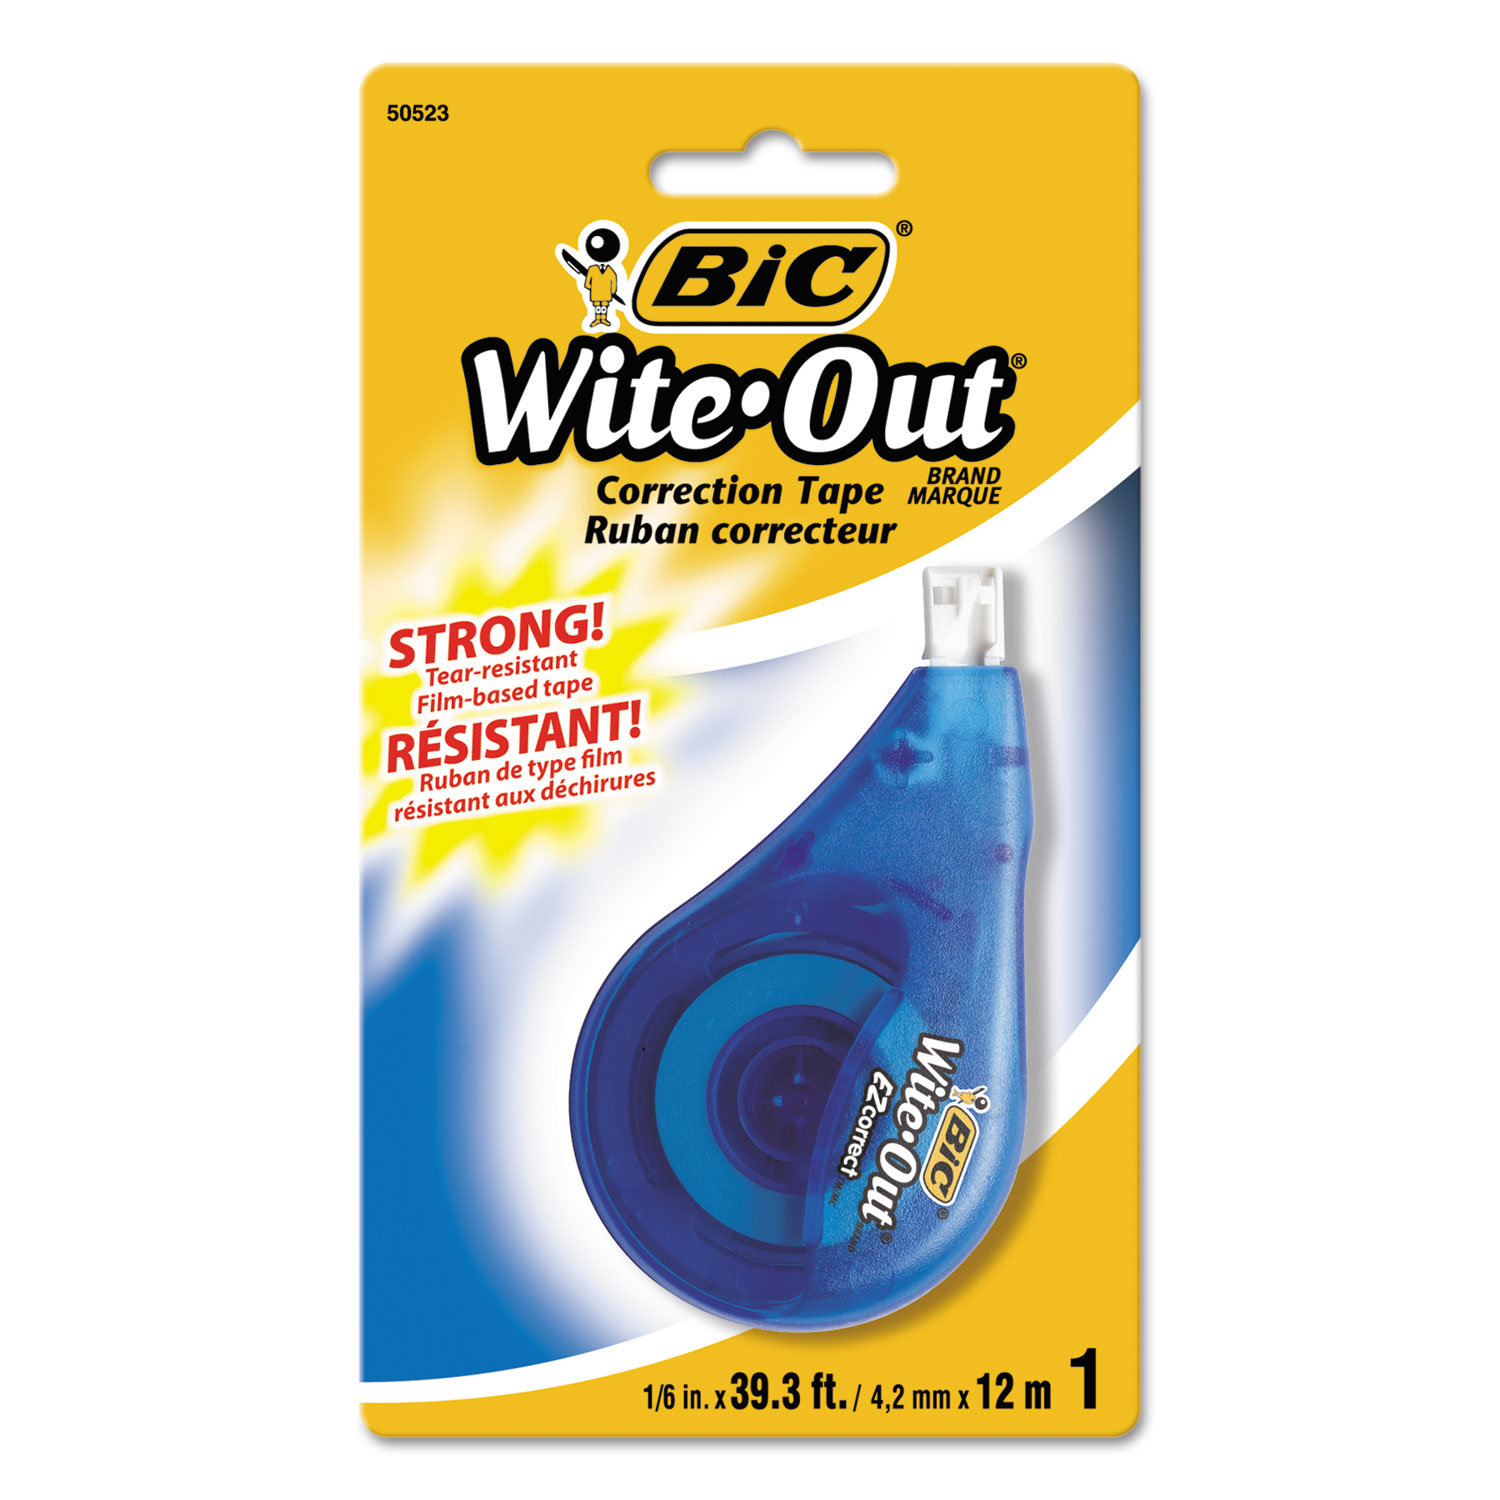  BIC WOTAPP11 WHI Wite-Out EZ Correct Correction Tape, Non-Refillable, 1/6 x 472 (BICWOTAPP11) 